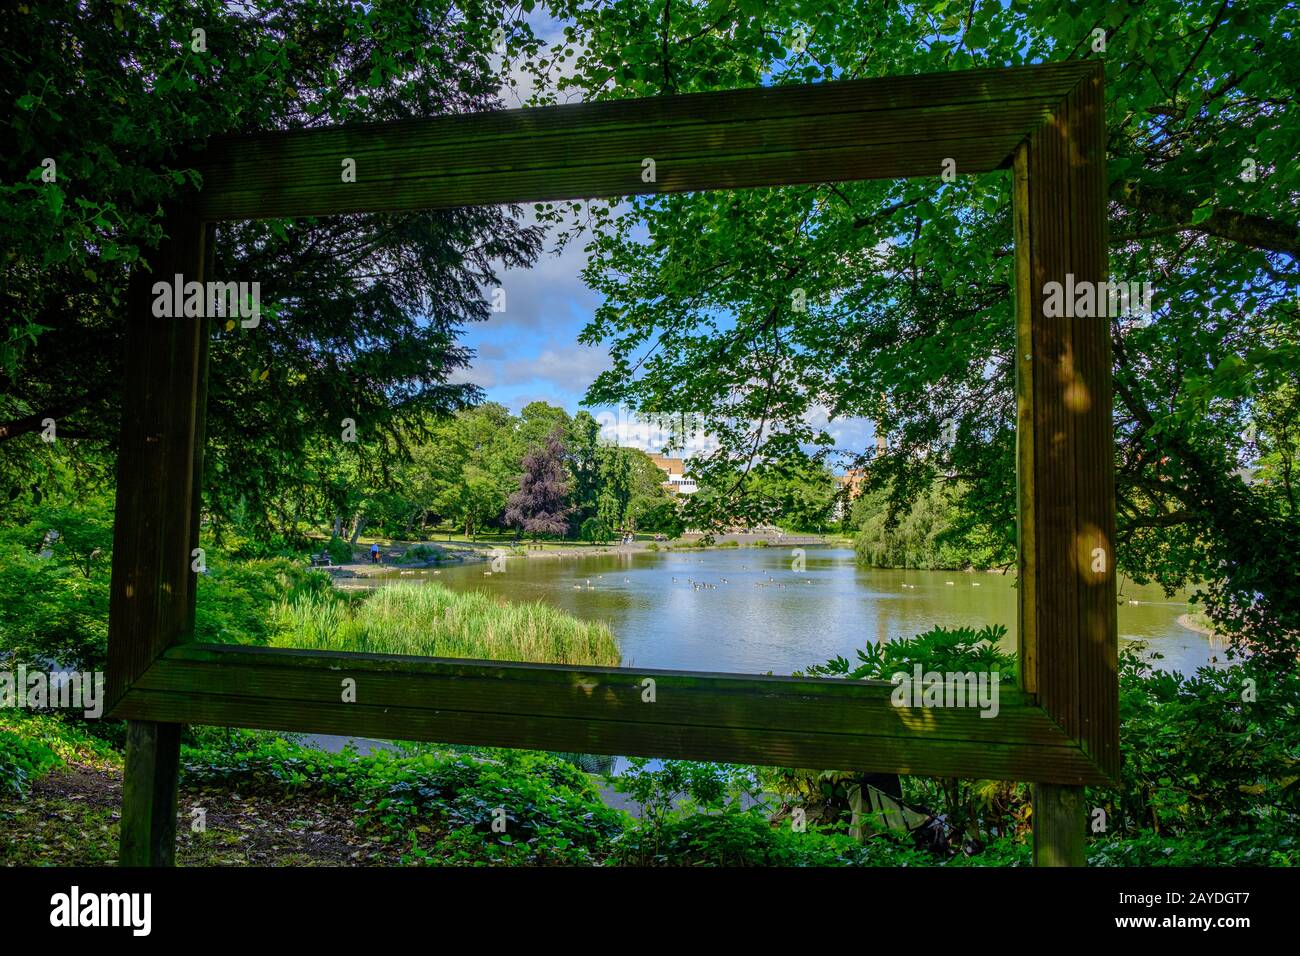 View through large hollow picture frame of pond, trees, ducks and people at Leases Park in Newcastle, England Stock Photo